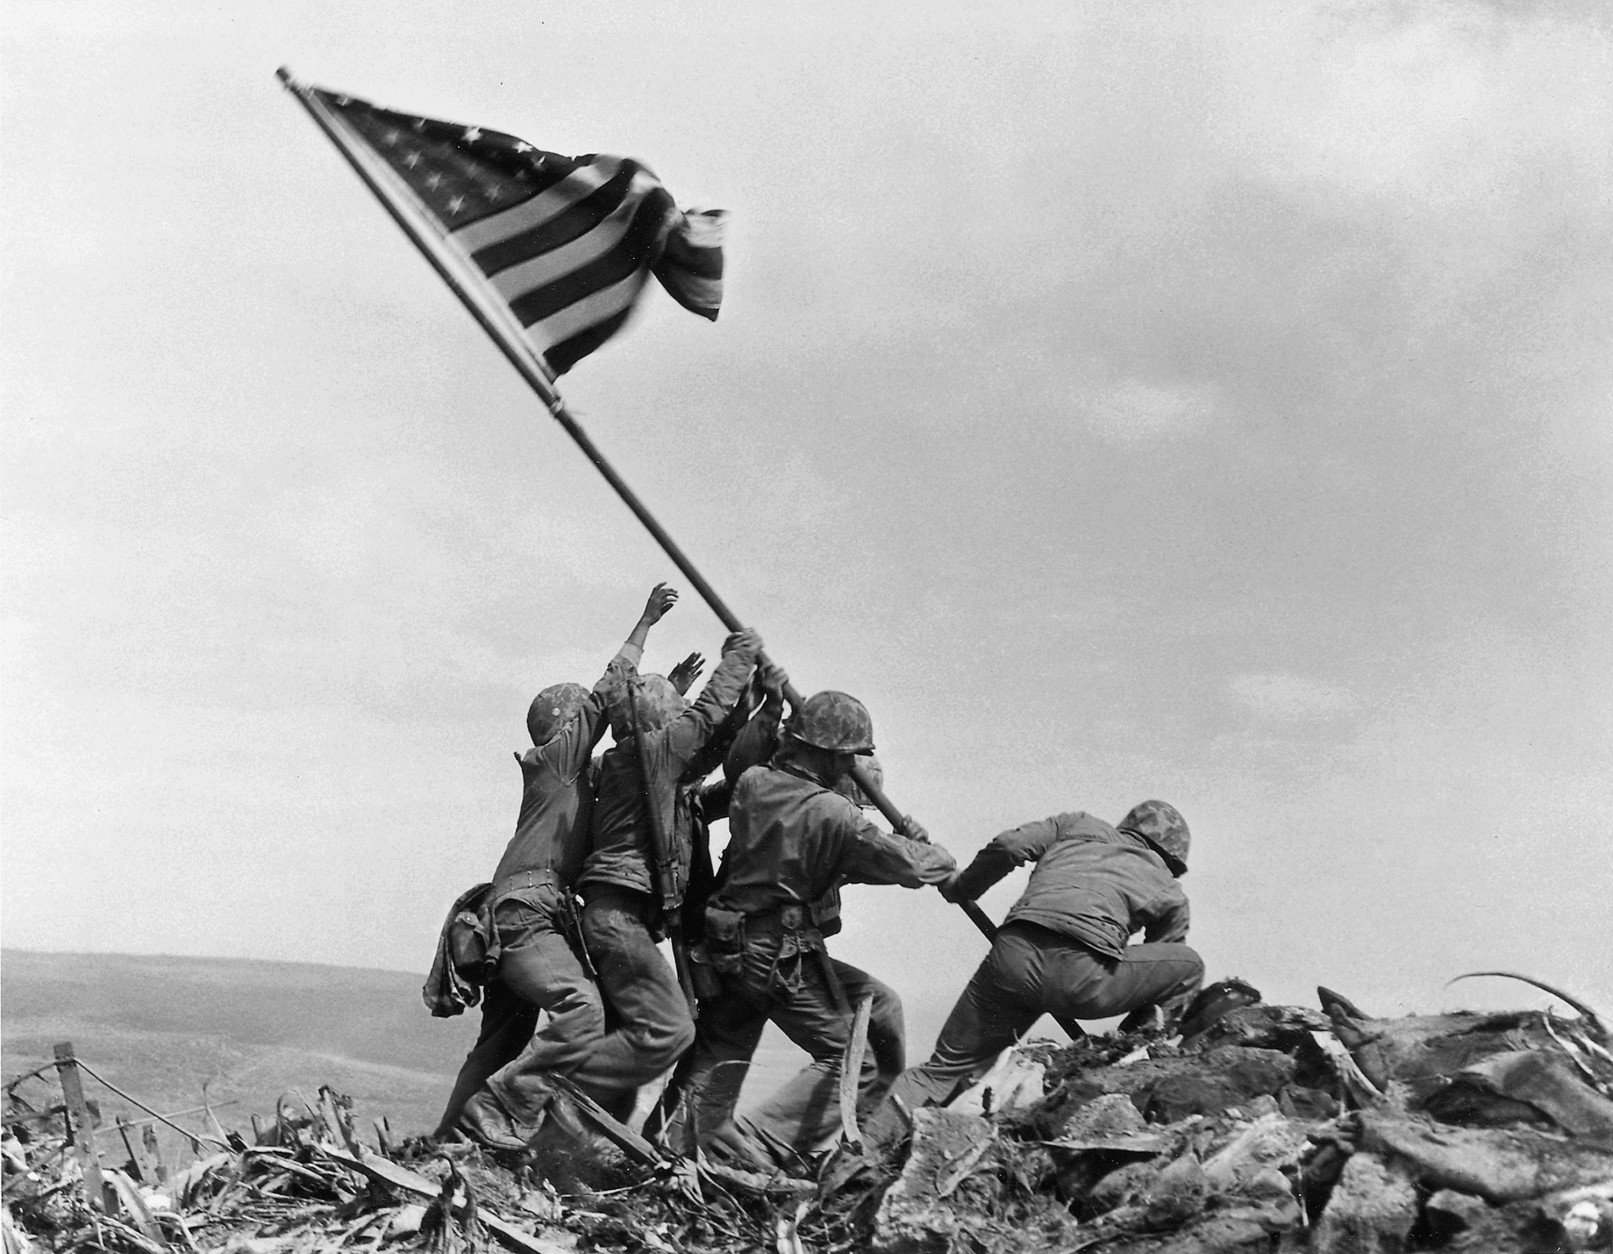 FILE - In this Feb. 23, 1945, file photo, U.S. Marines of the 28th Regiment, 5th Division, raise a U.S. flag atop Mount Suribachi, Iwo Jima. Two Gastonia, N.C., men, Joseph Tedder, 90, and Mack Drake, 89, fought alongside more than 70,000 Marines, sailors and airmen on Iwo Jima, a tiny 8-square mile speck of volcanic rock and sand midway between Guam and Tokyo, during the closing months of World War II. (AP Photo/Joe Rosenthal, File)